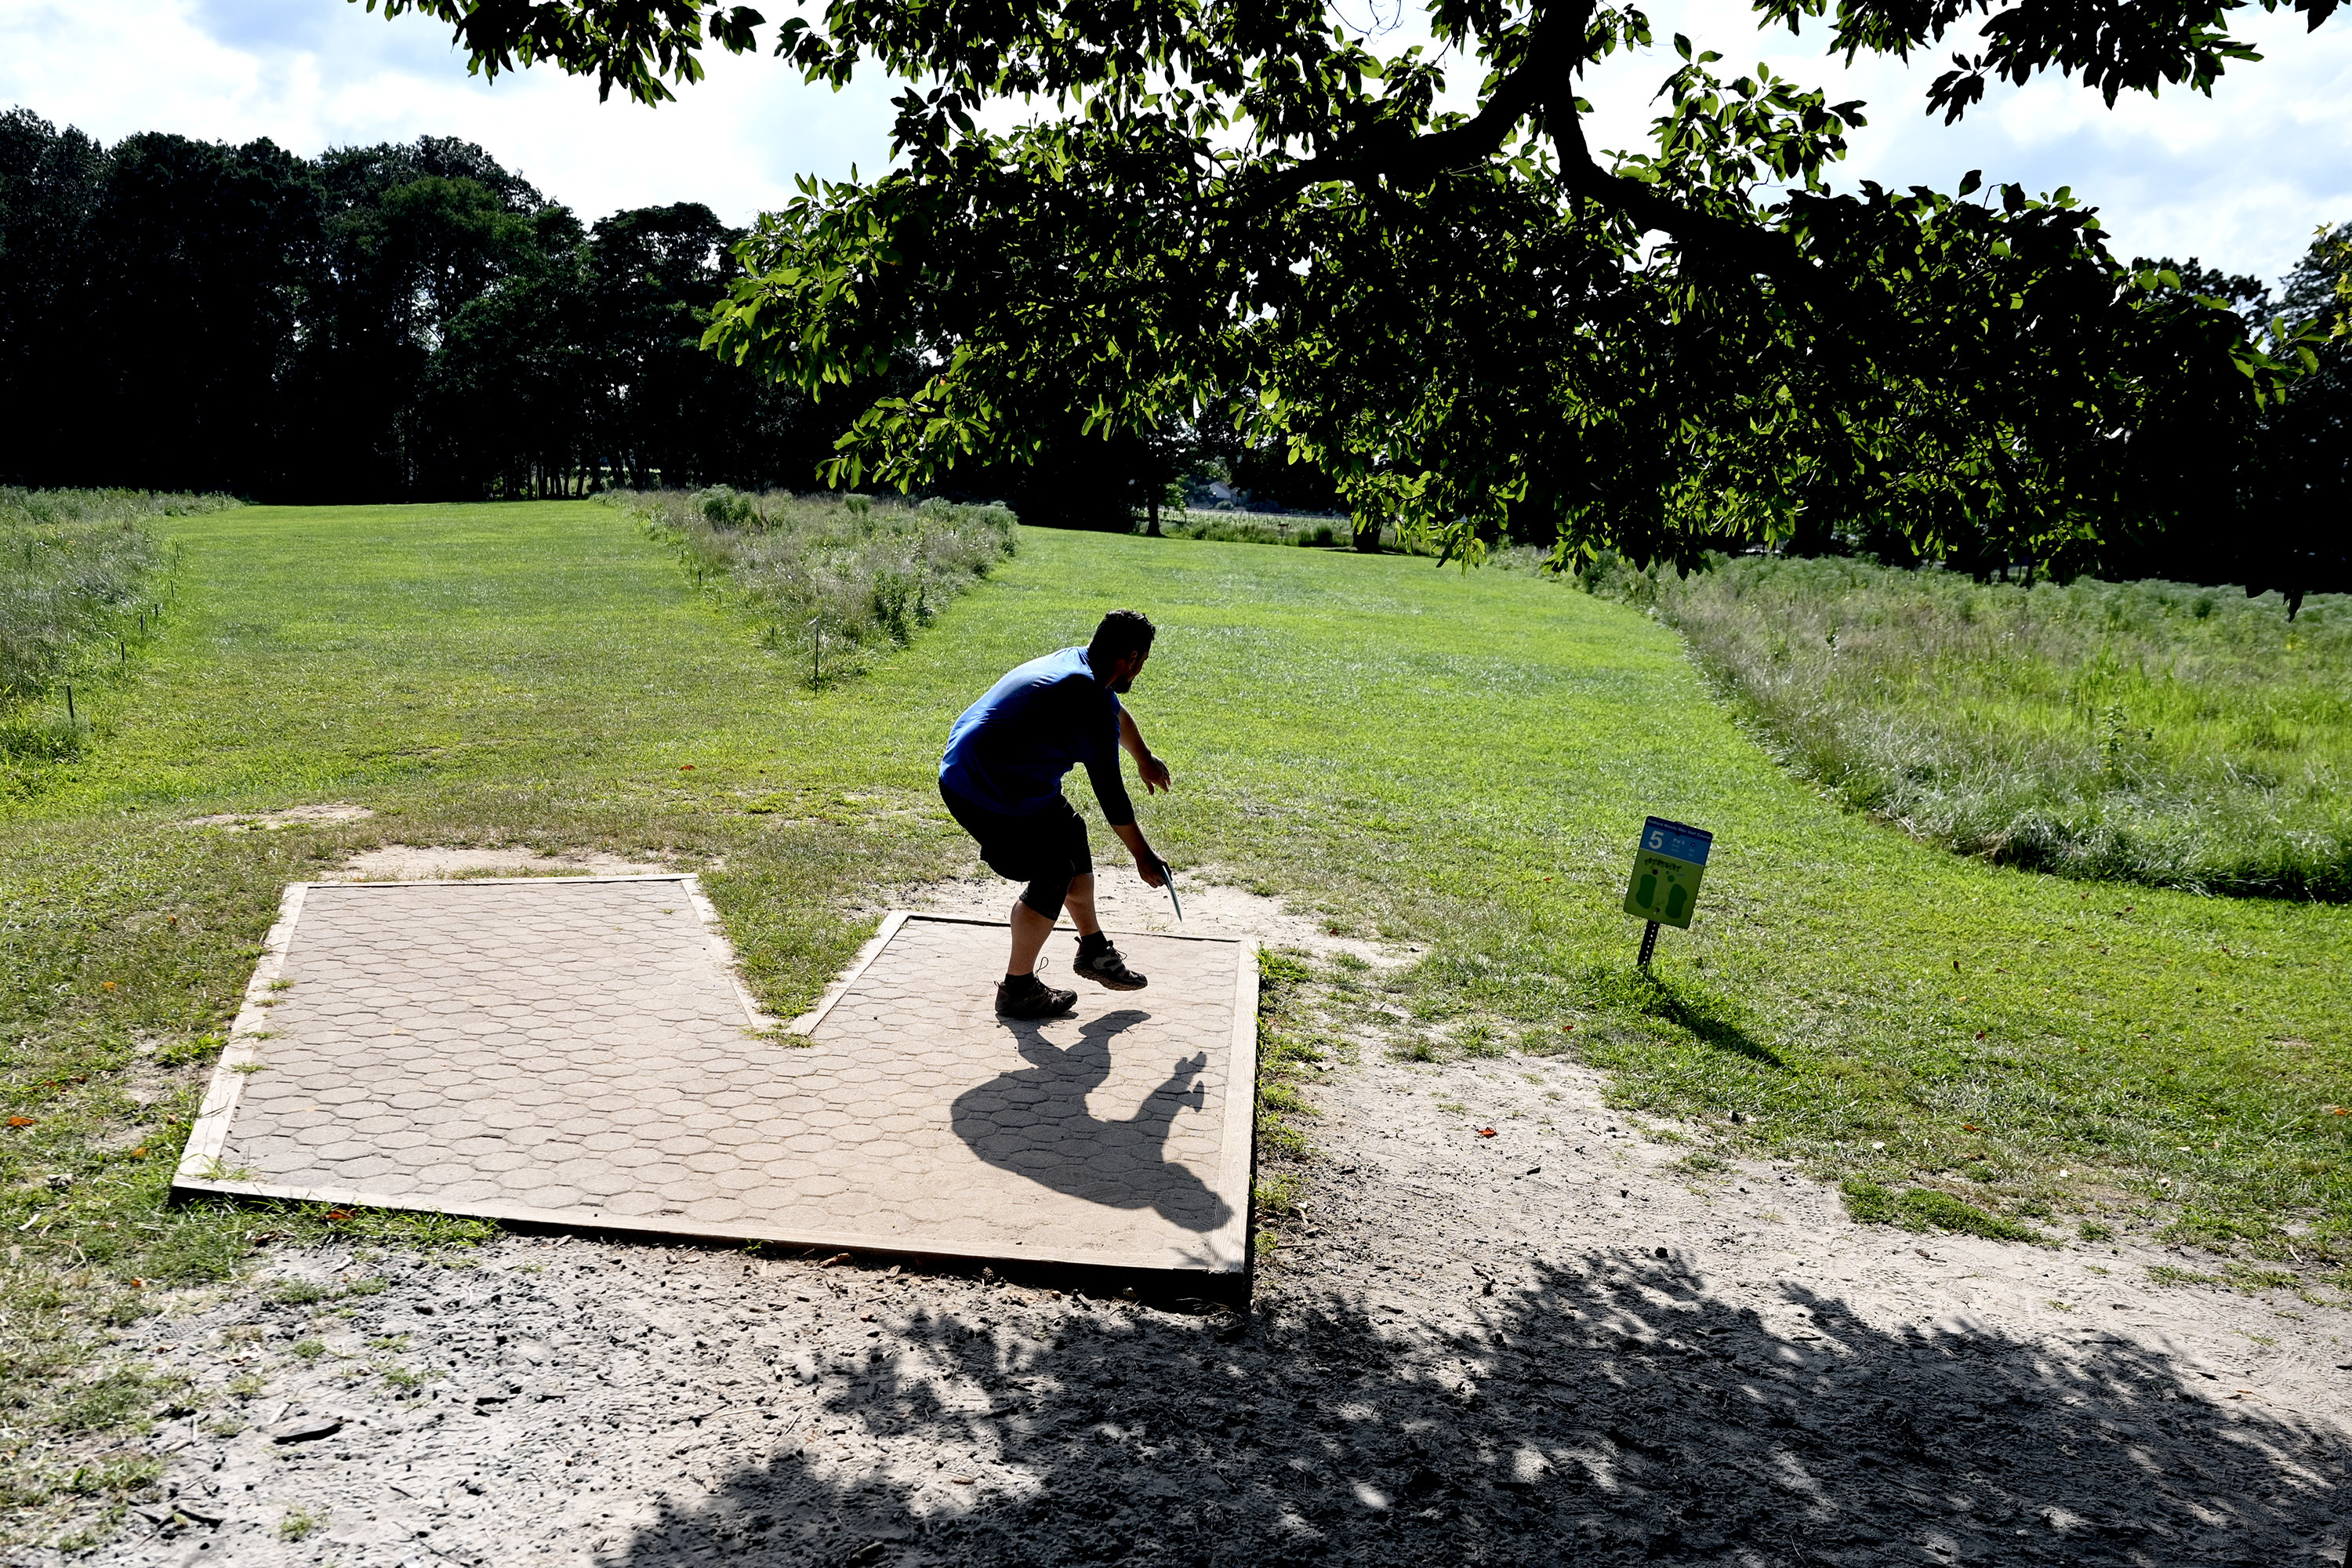 Could Your Community Use a Disc Golf Course?